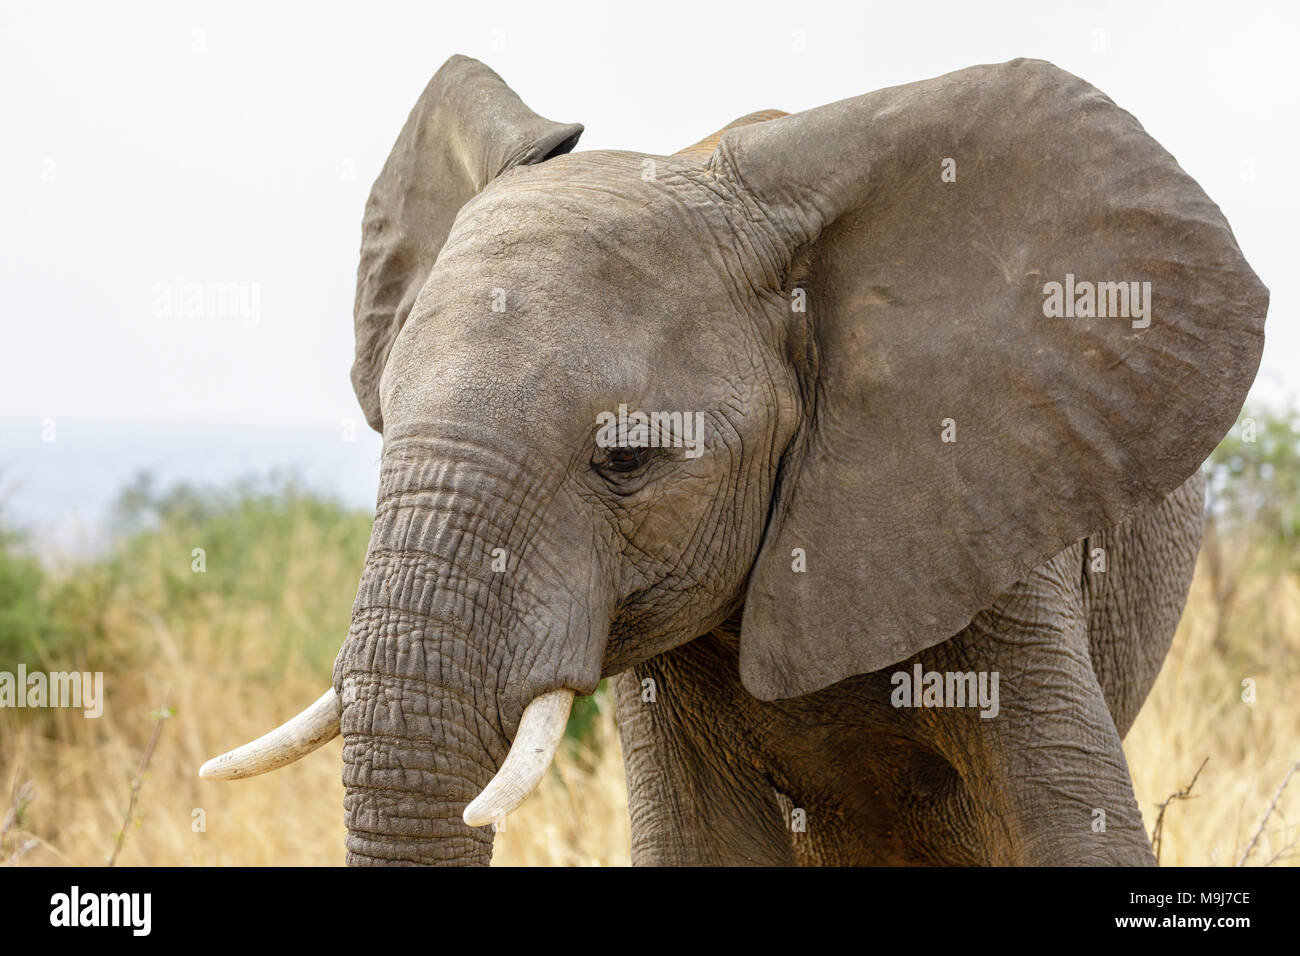 Closeup portrait of an elephant in the wild. Stock Photo